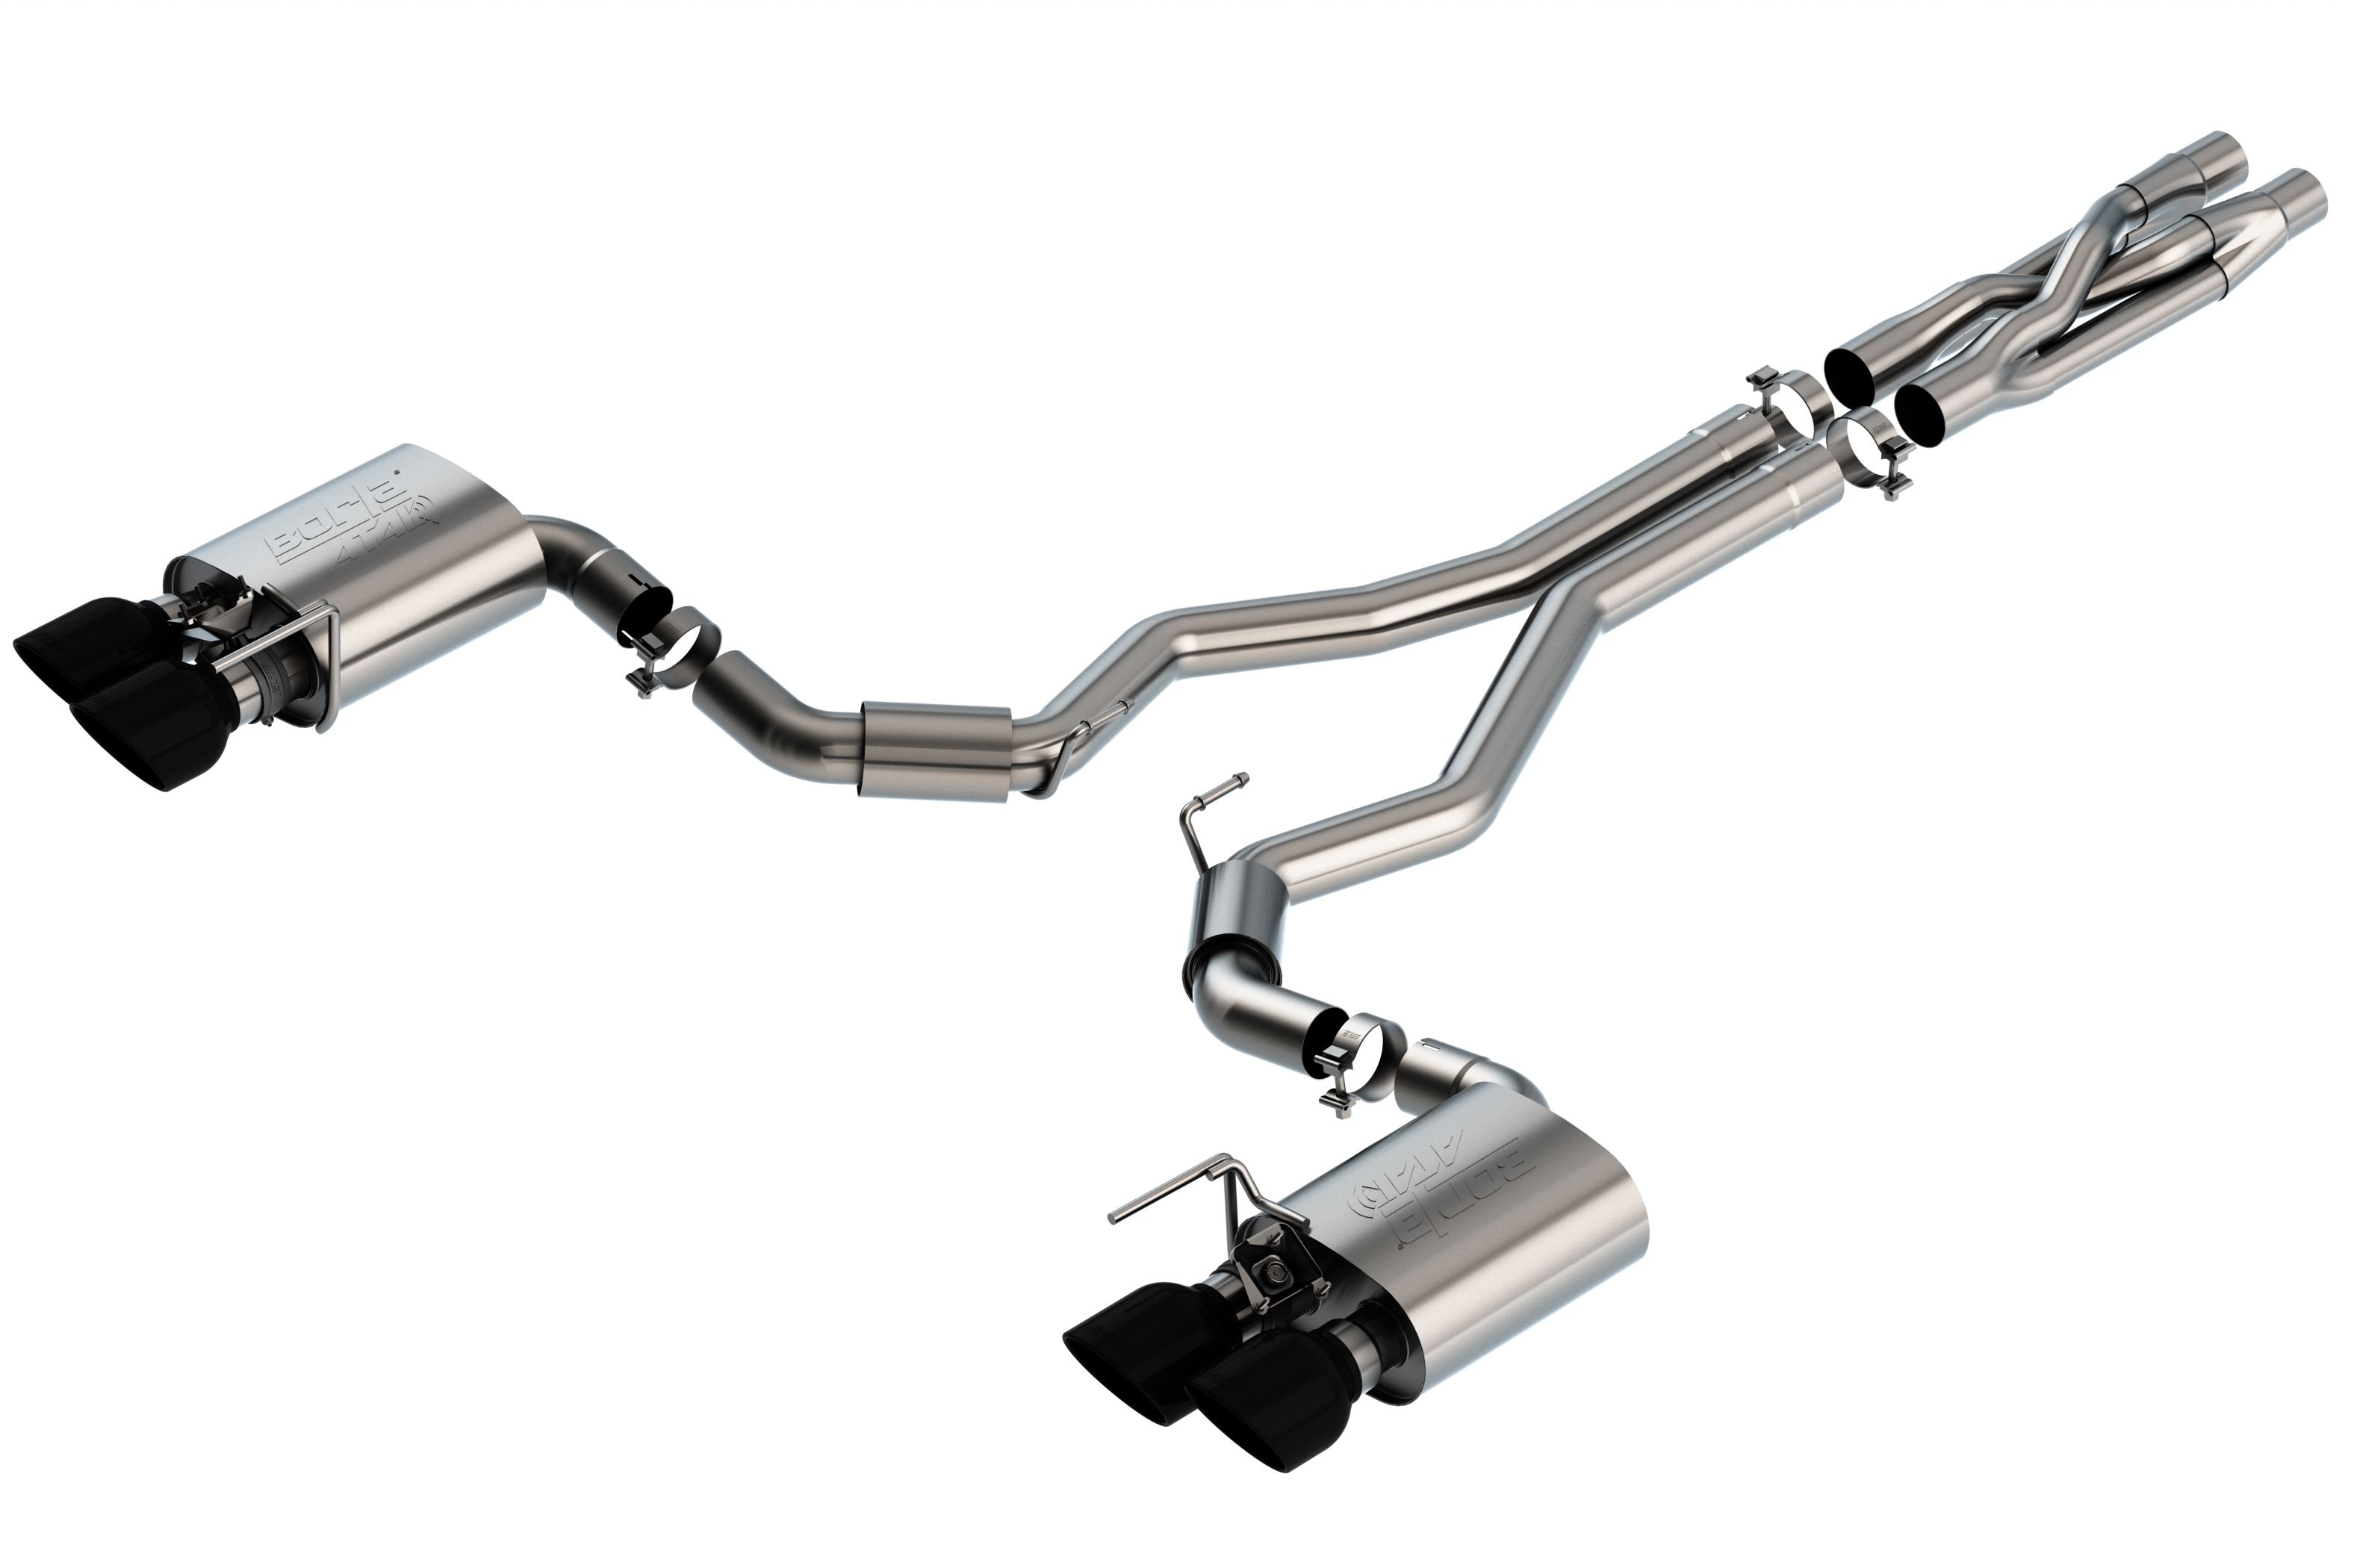 ATAK Cat-Back Exhaust System 2020-2021 Mustang Shelby GT500 5.2L 8 Cyl. Automati